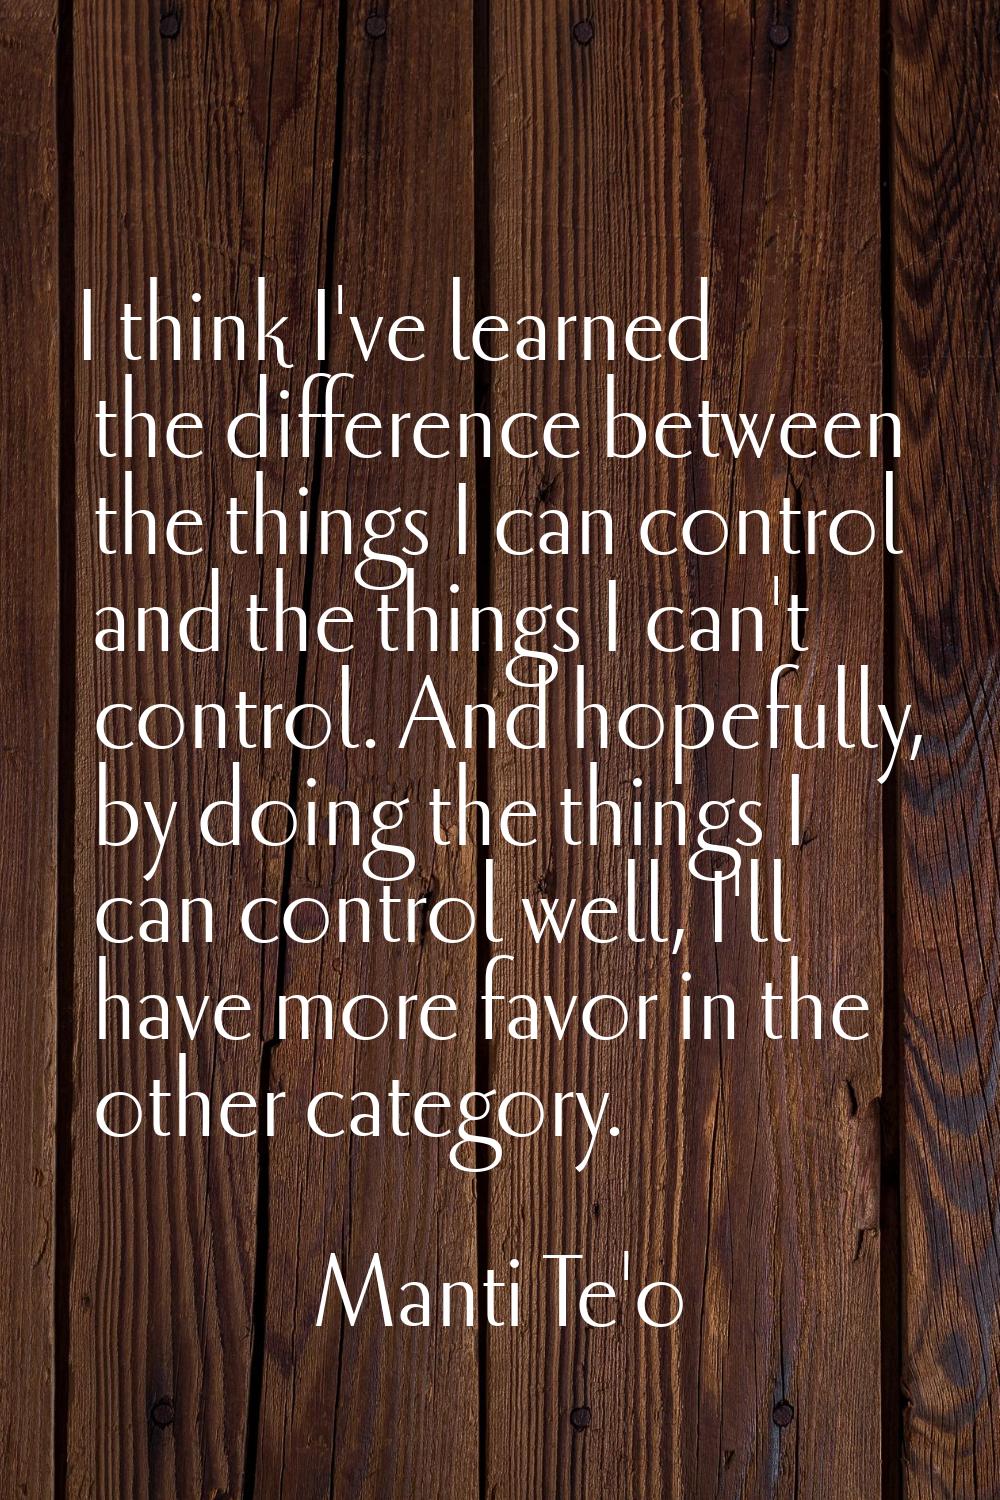 I think I've learned the difference between the things I can control and the things I can't control